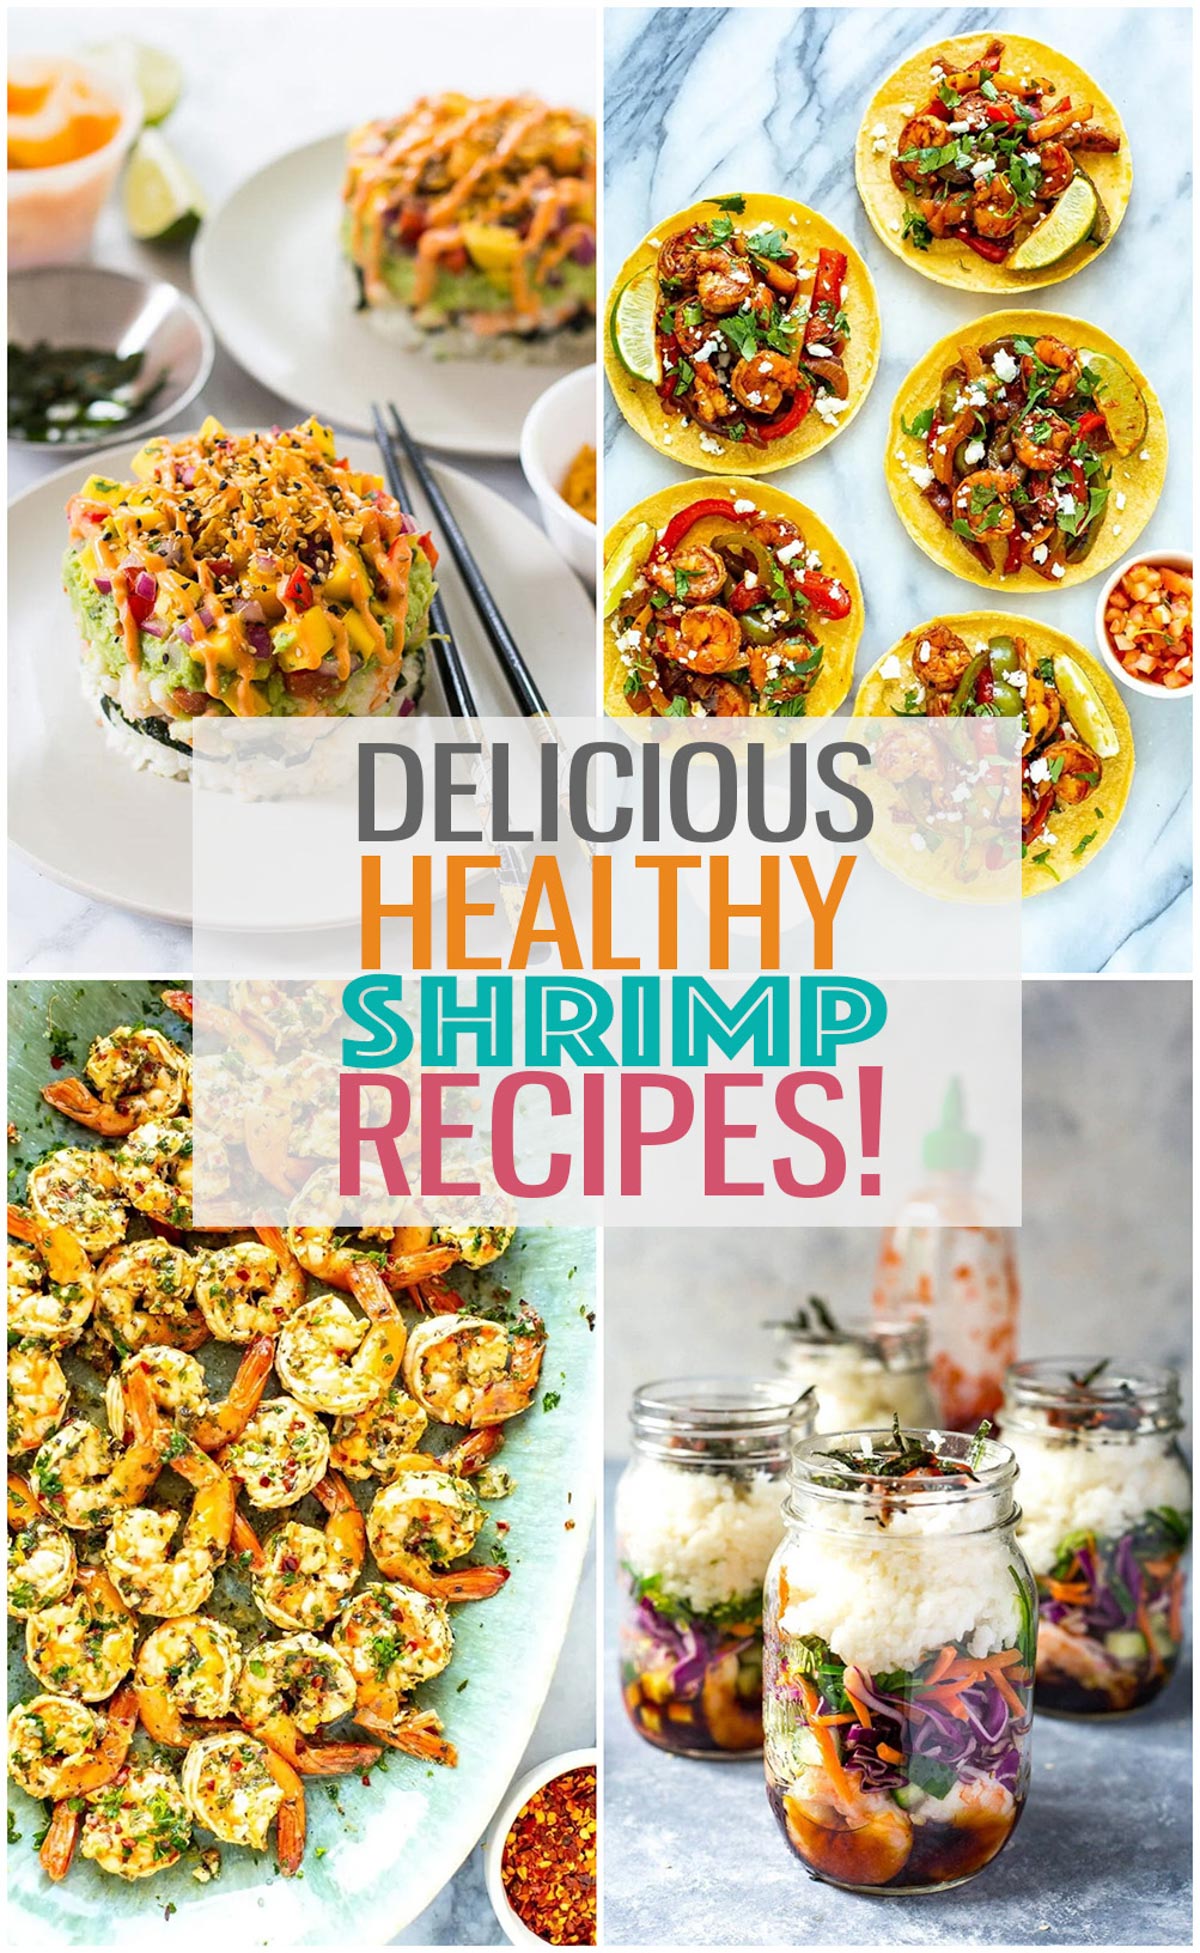 19+ Insanely Delicious & Healthy Shrimp Recipes - The Girl on Bloor